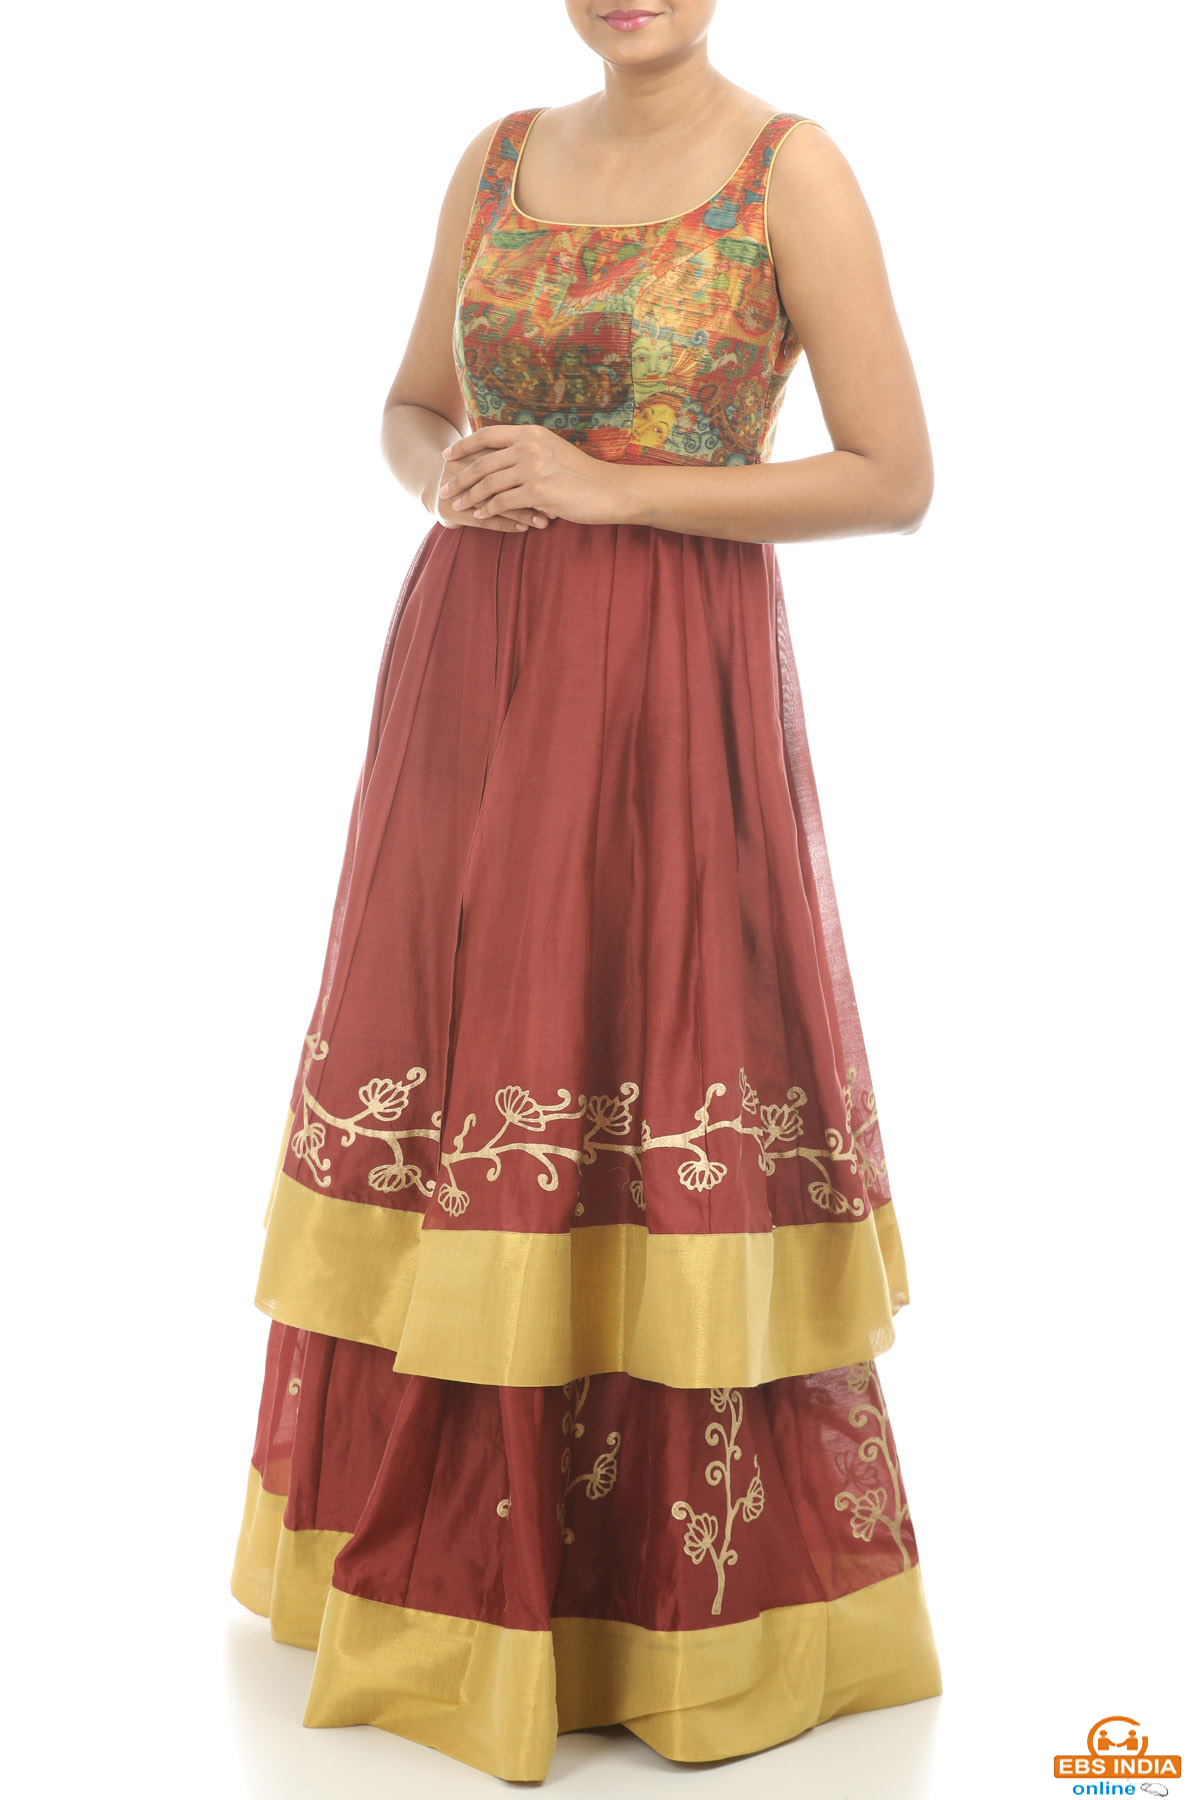 Shop For Trendy Anarkalis From TheHLabel!